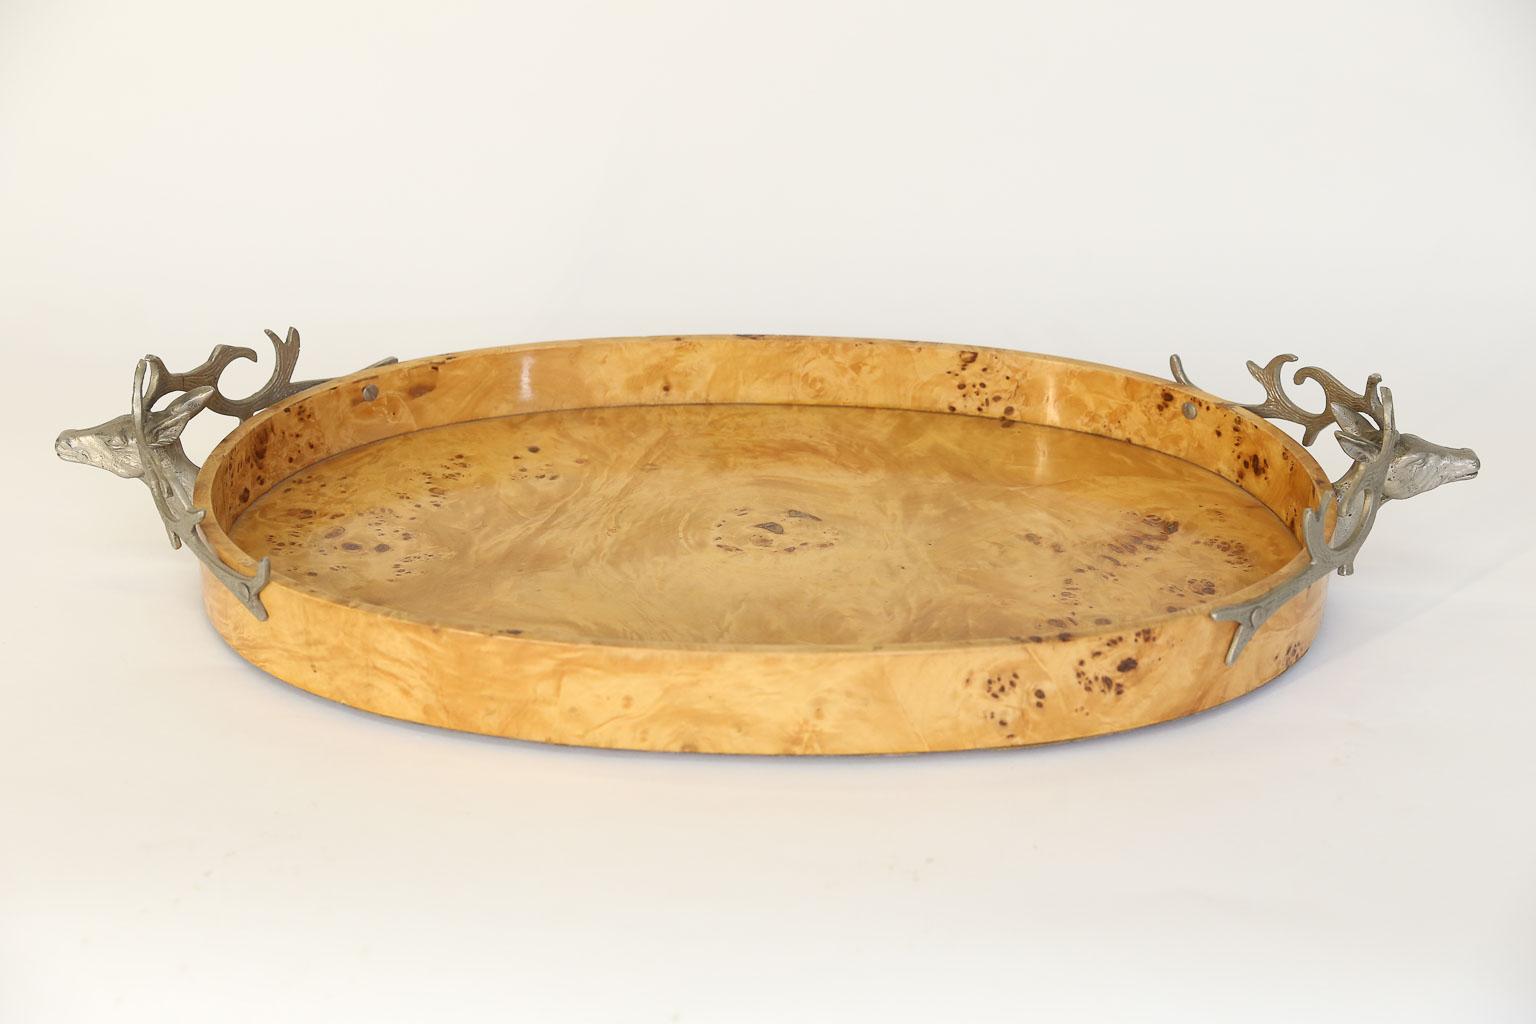 20th Century Burl Wood Tray with Stag Head Handles